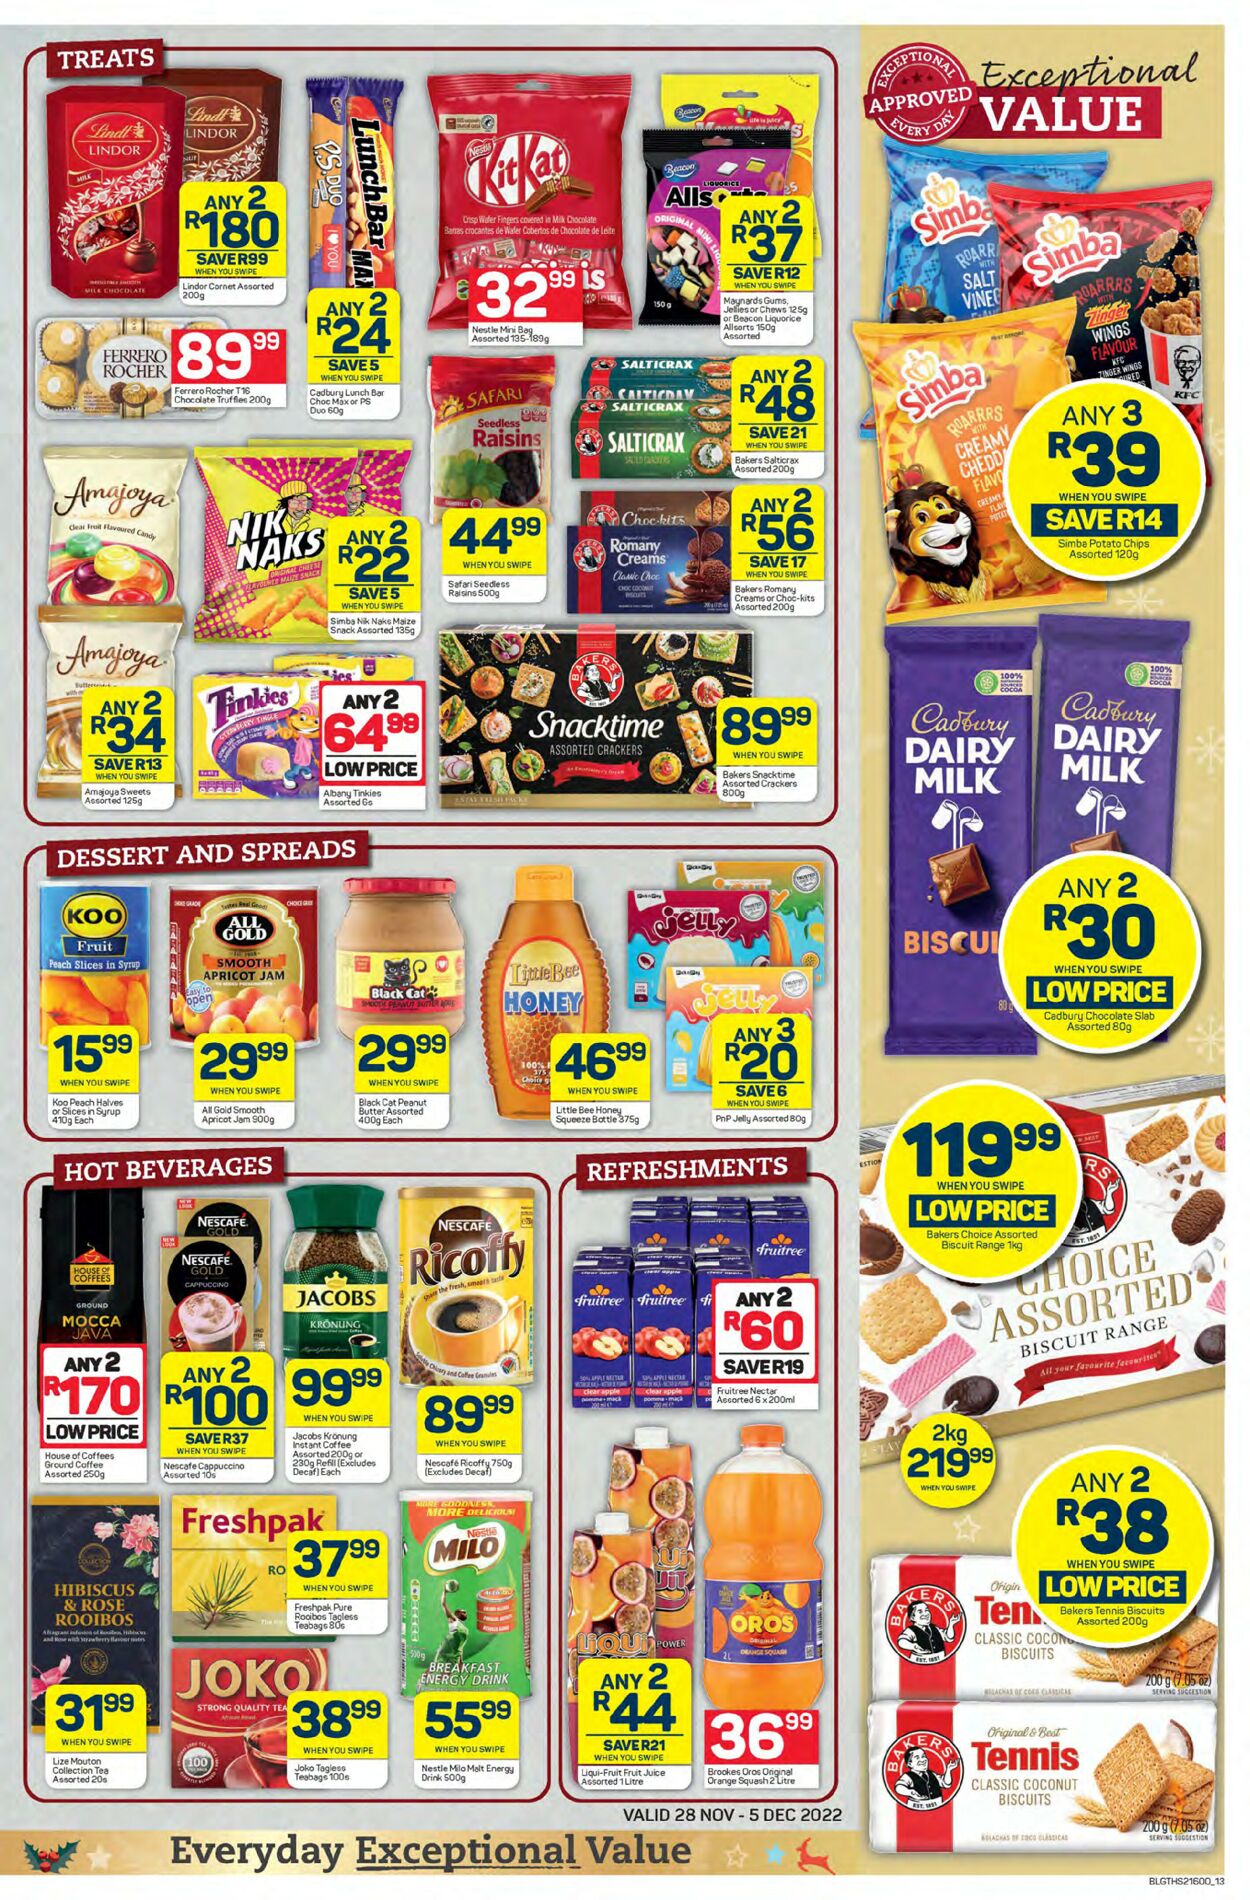 Pick n Pay Catalogue - 2022/11/28-2022/12/05 (Page 13)